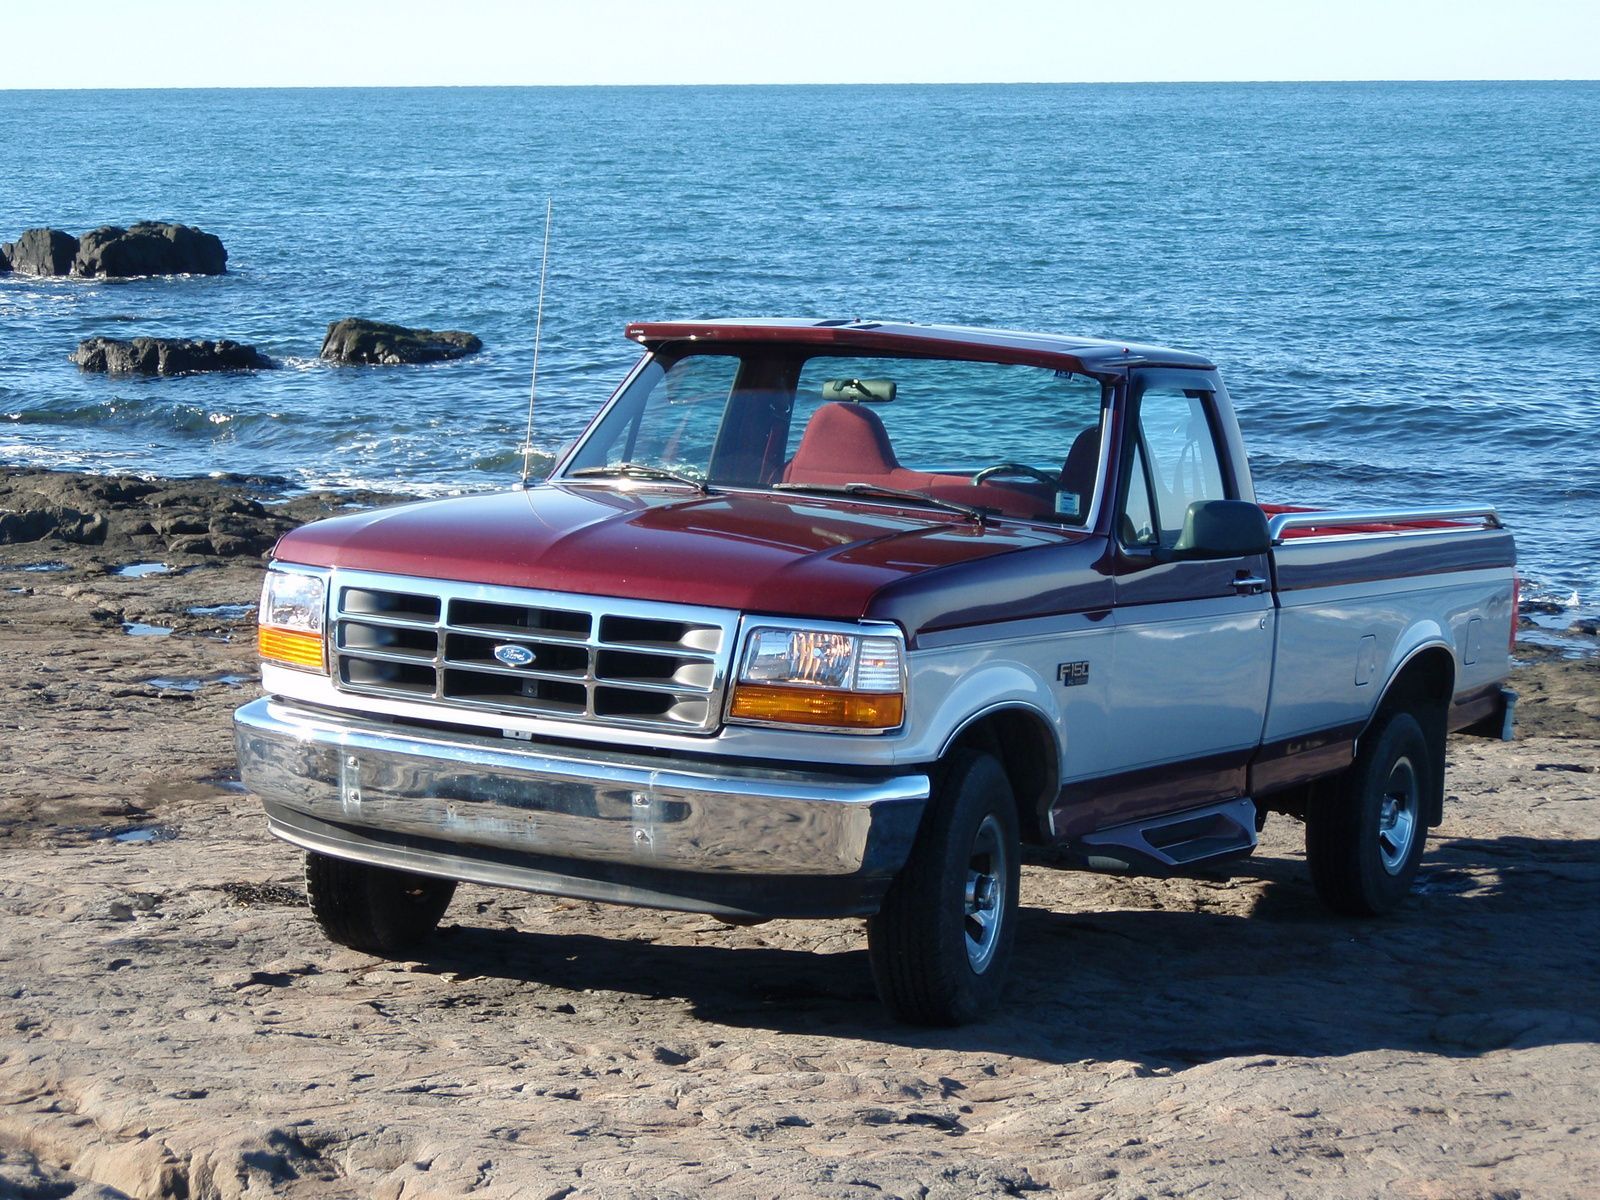 1996 Ford F-Series